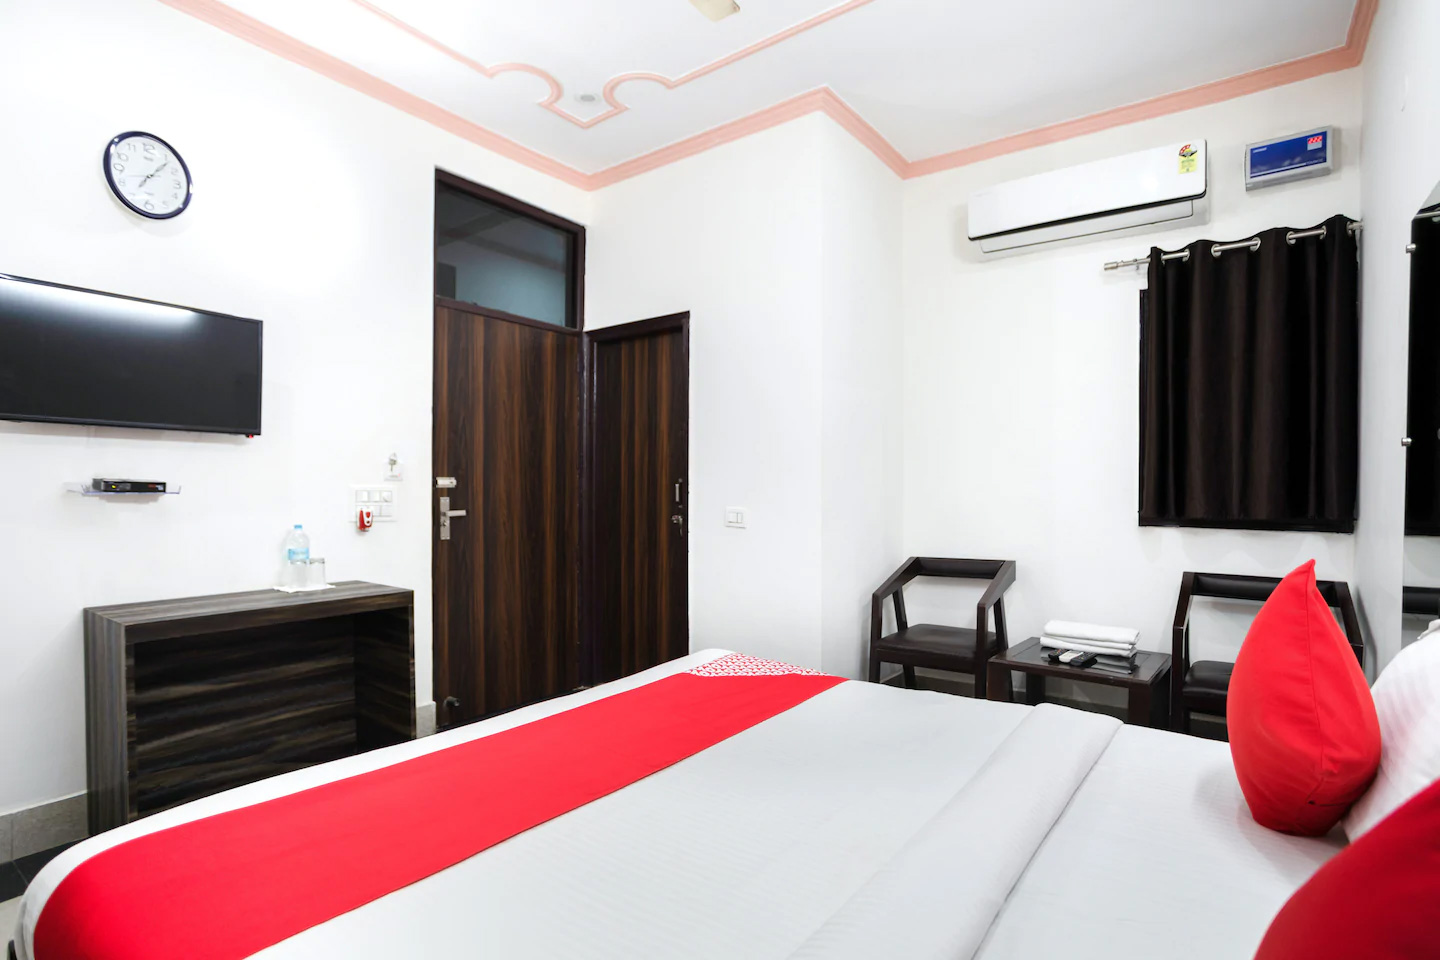 Guest house in Gurgaon, guest house near medanta medicity, Budget guest house in Gurgaon Delhi NCR